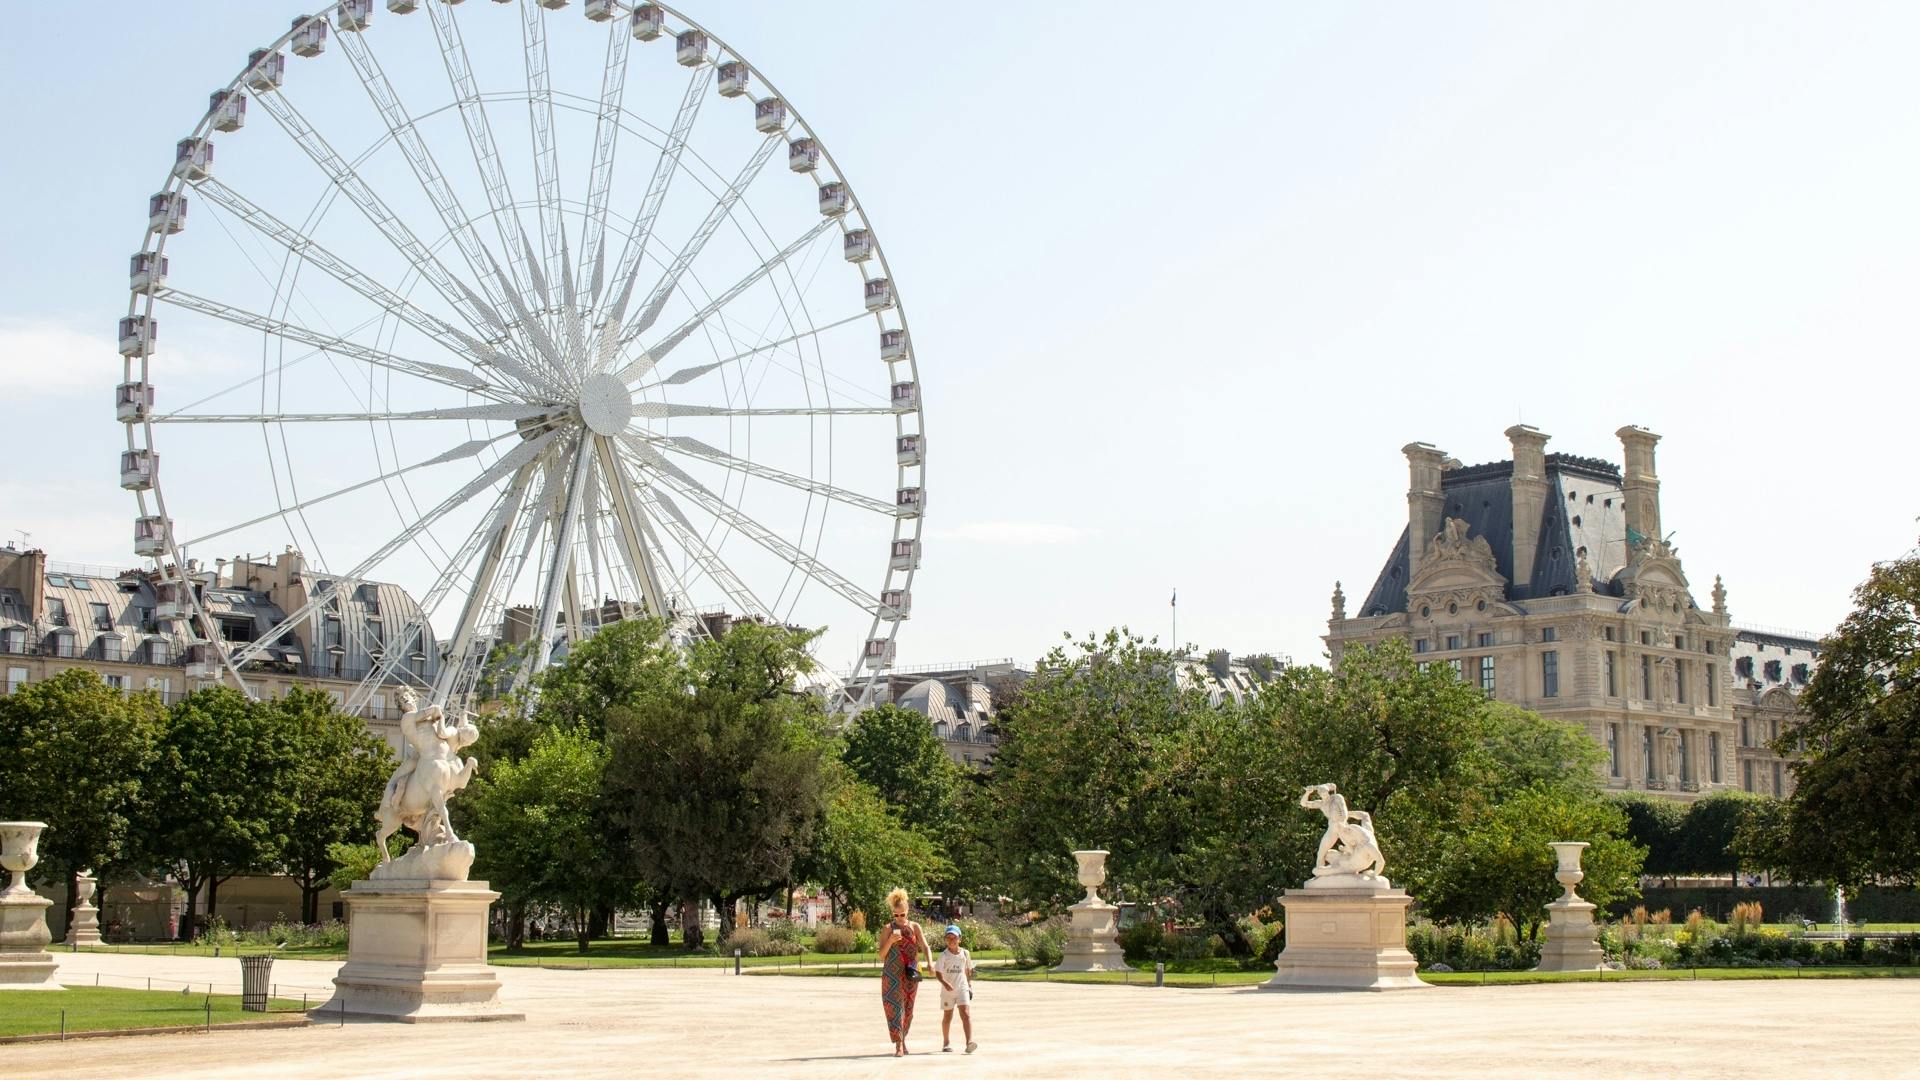 Paris most iconic sightseeing spots walking tour